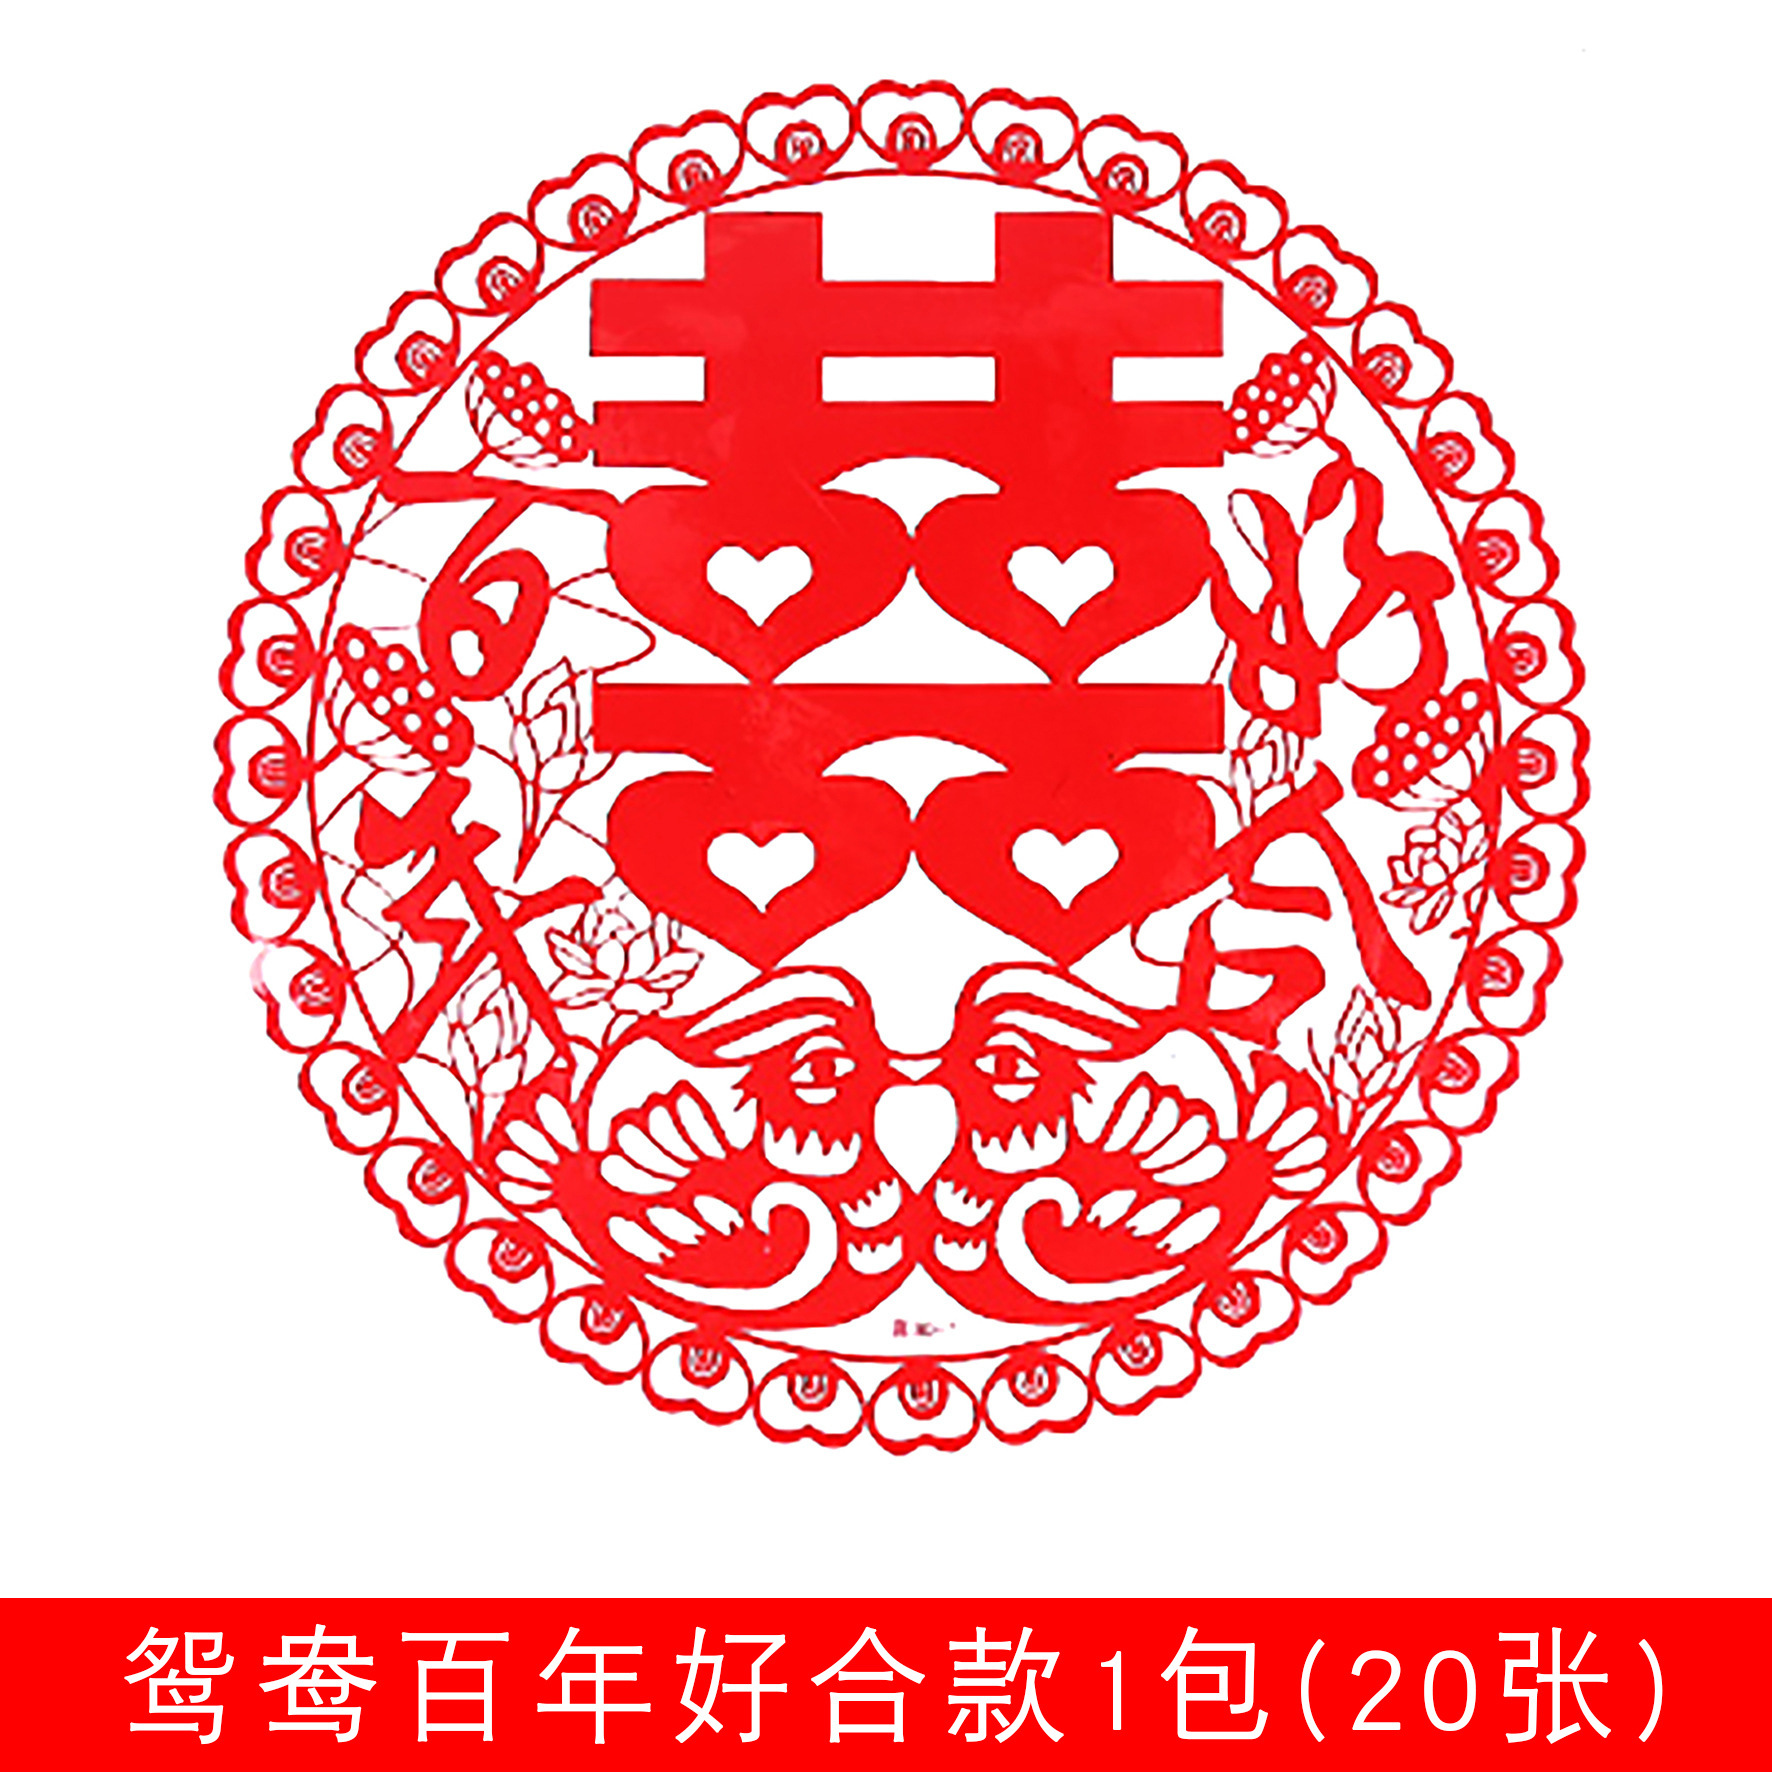 Wedding Room Decoration Glass Paper Cut Static Sticker Wedding Chinese Character Xi Stickers Layout Set Wedding Glass Paster Window Flower